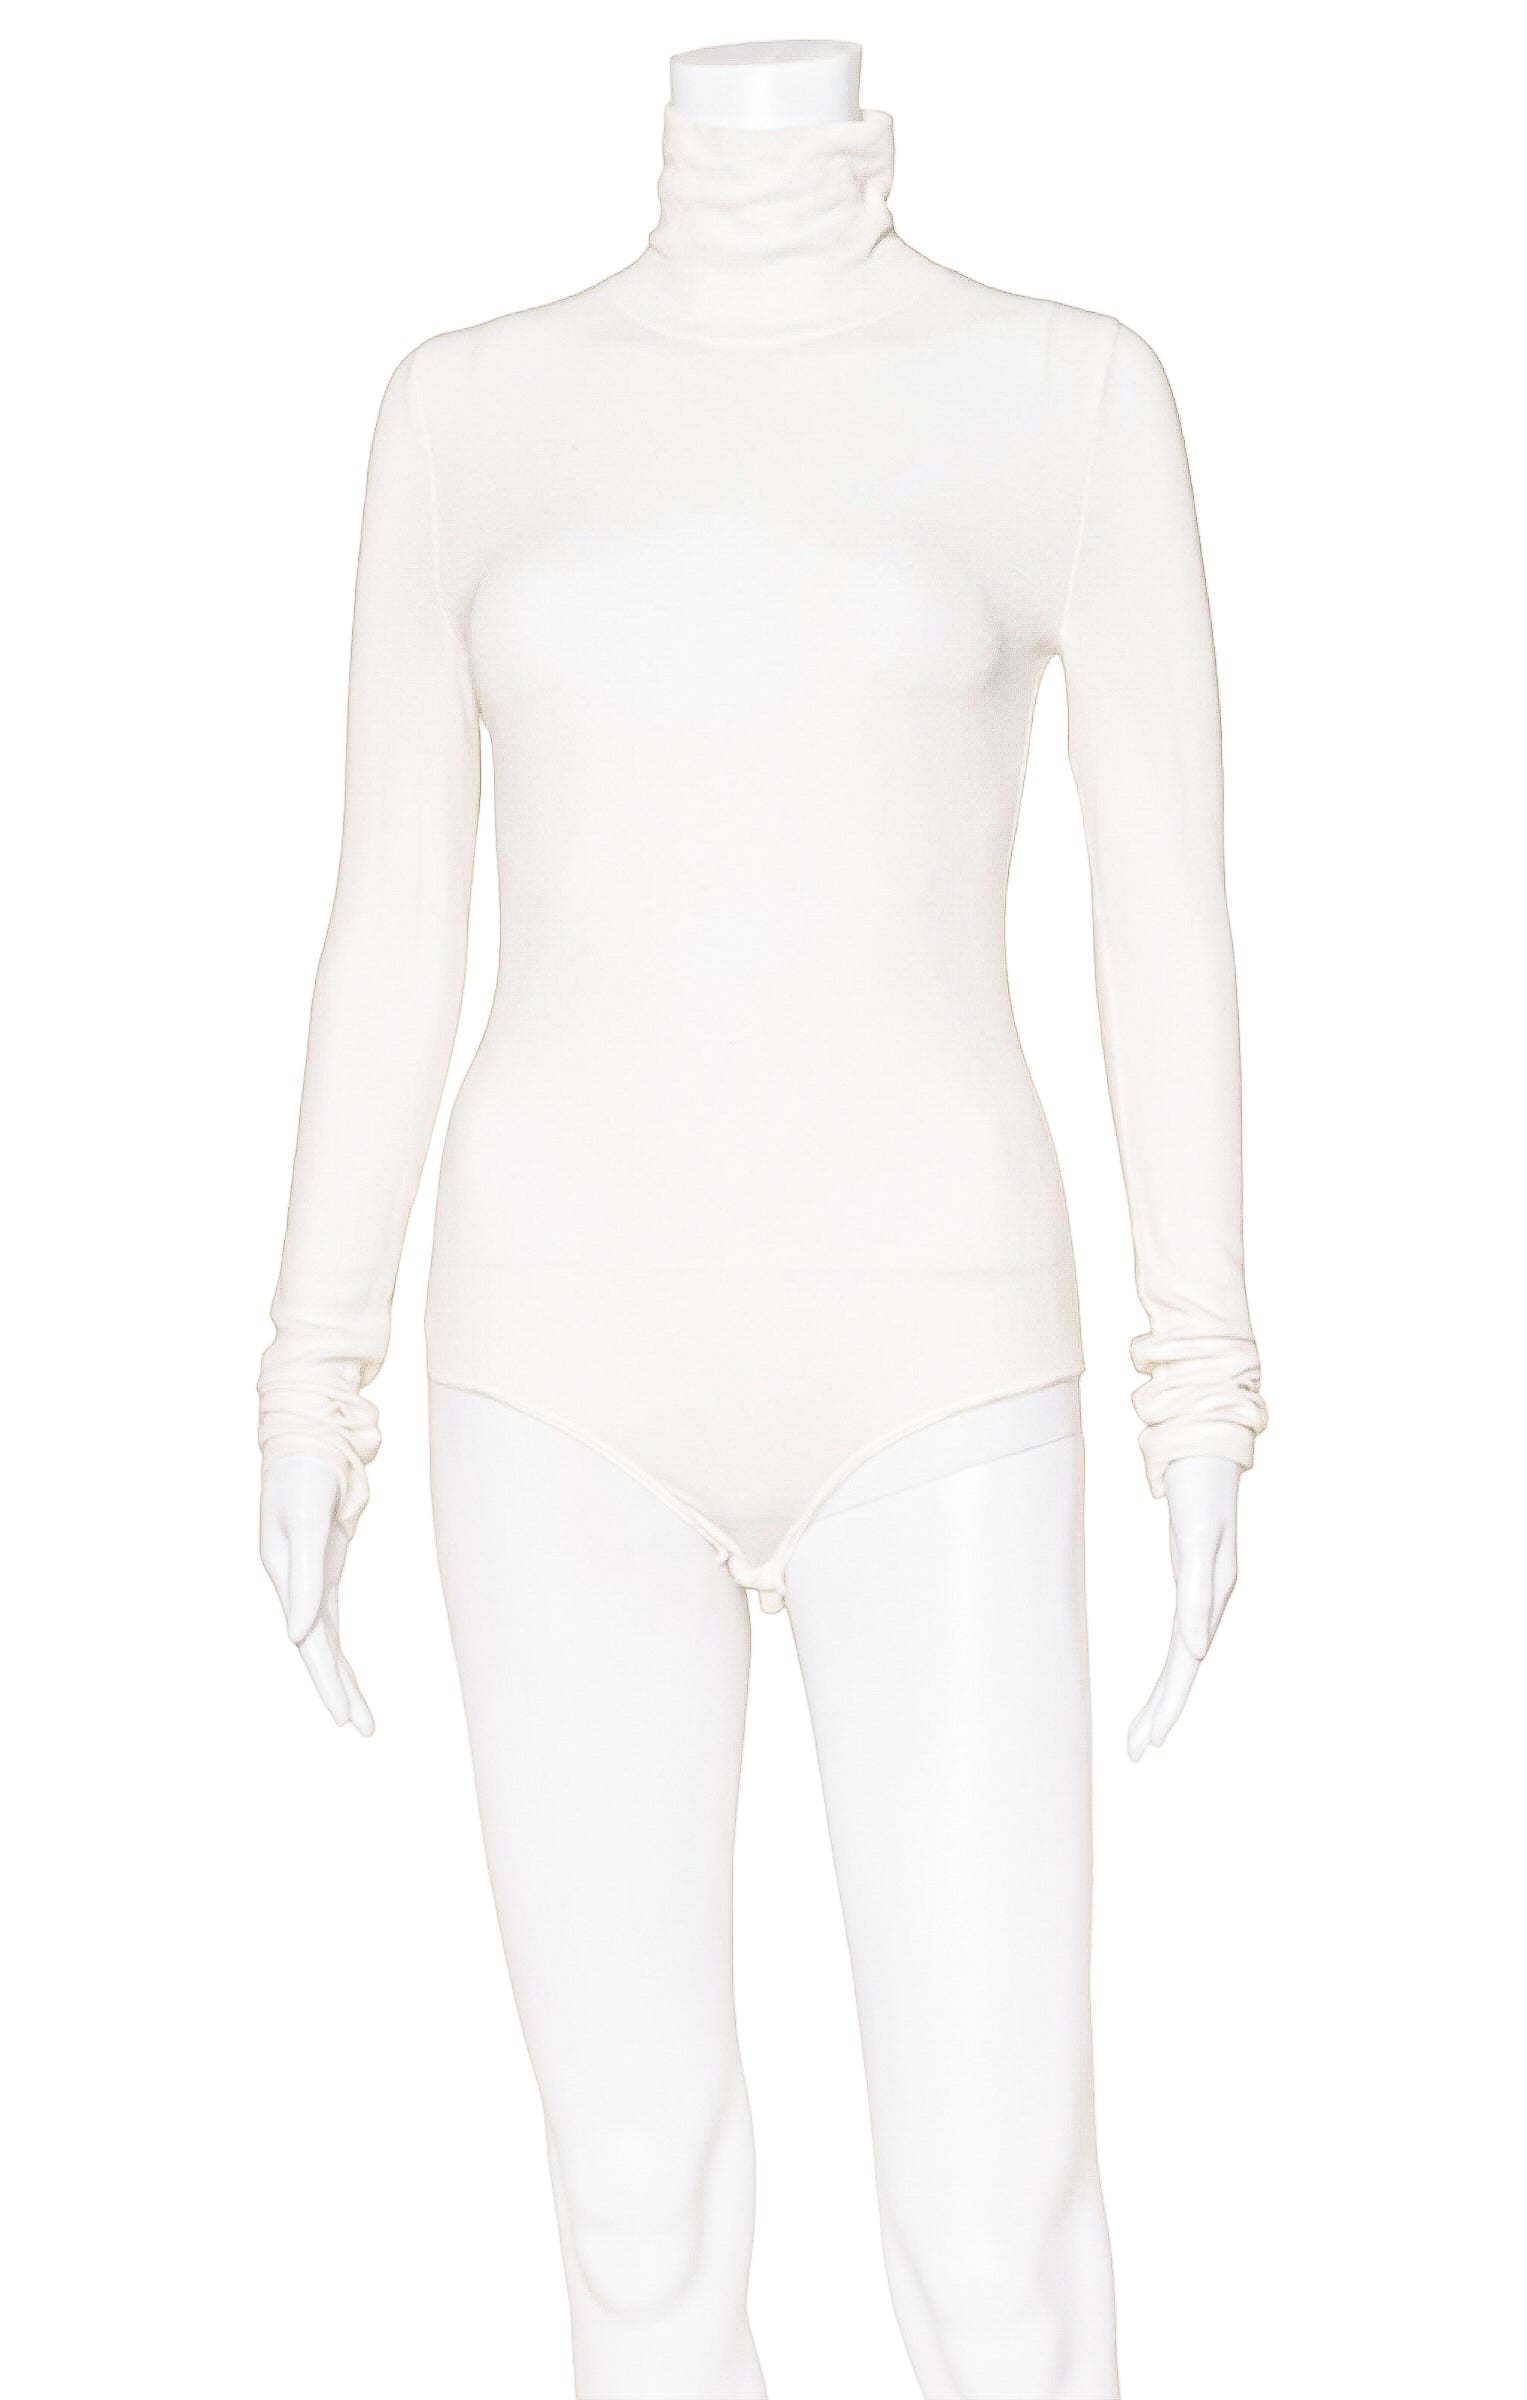 I.D. SARRIERI (NEW) with tags Bodysuit Size: S